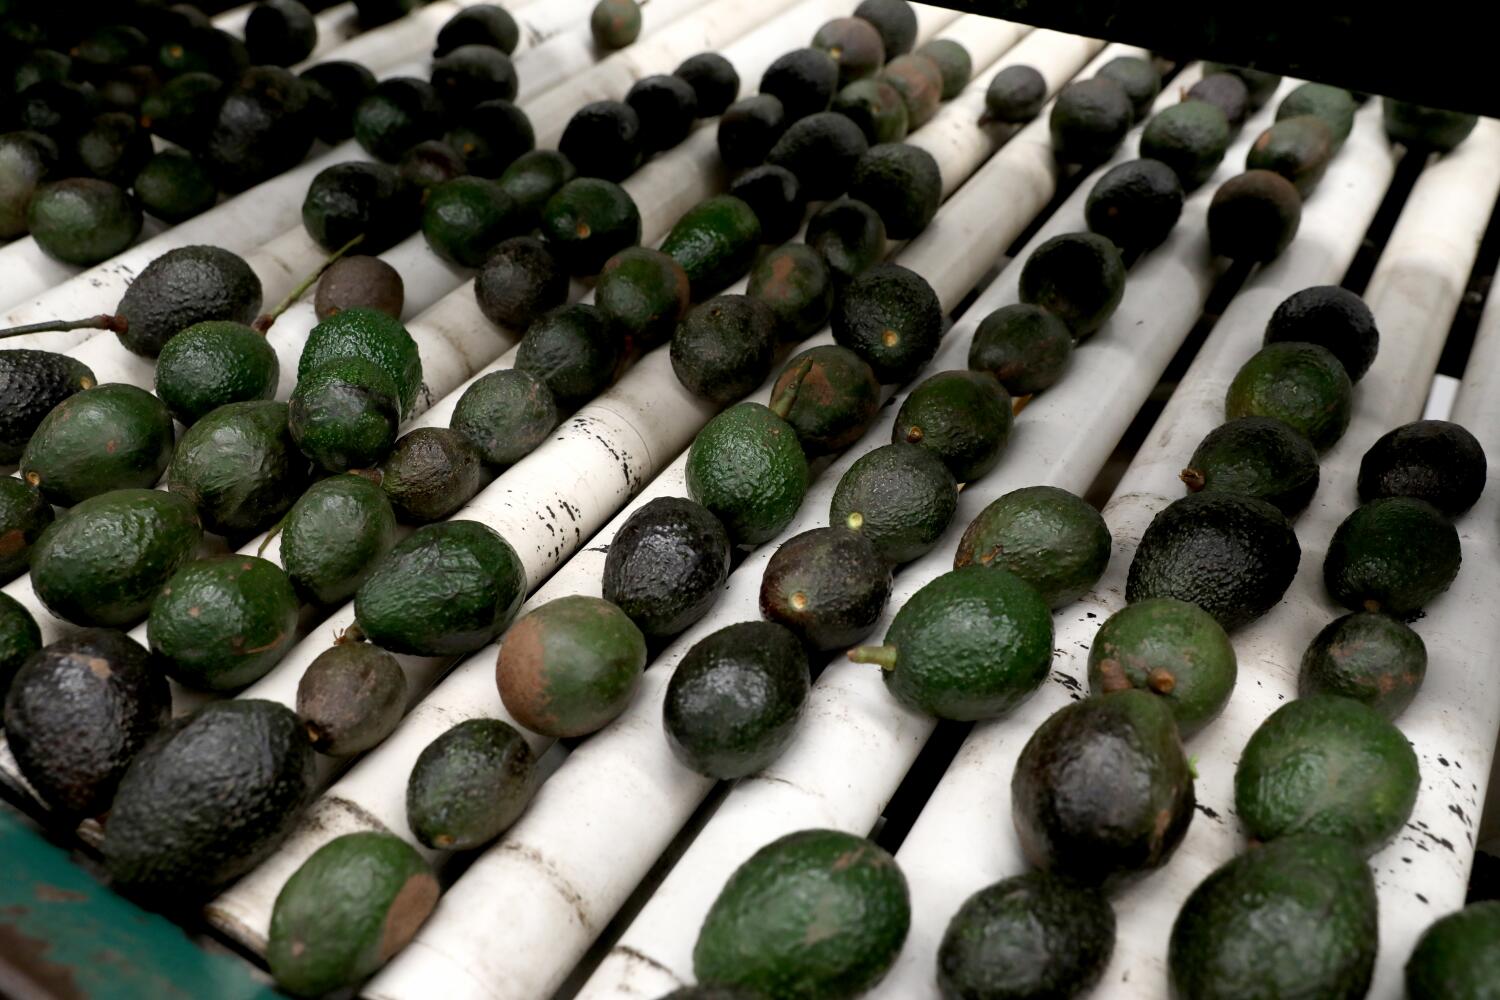 Opinion: Do you love avocados? Do you know what that's doing to Mexico?